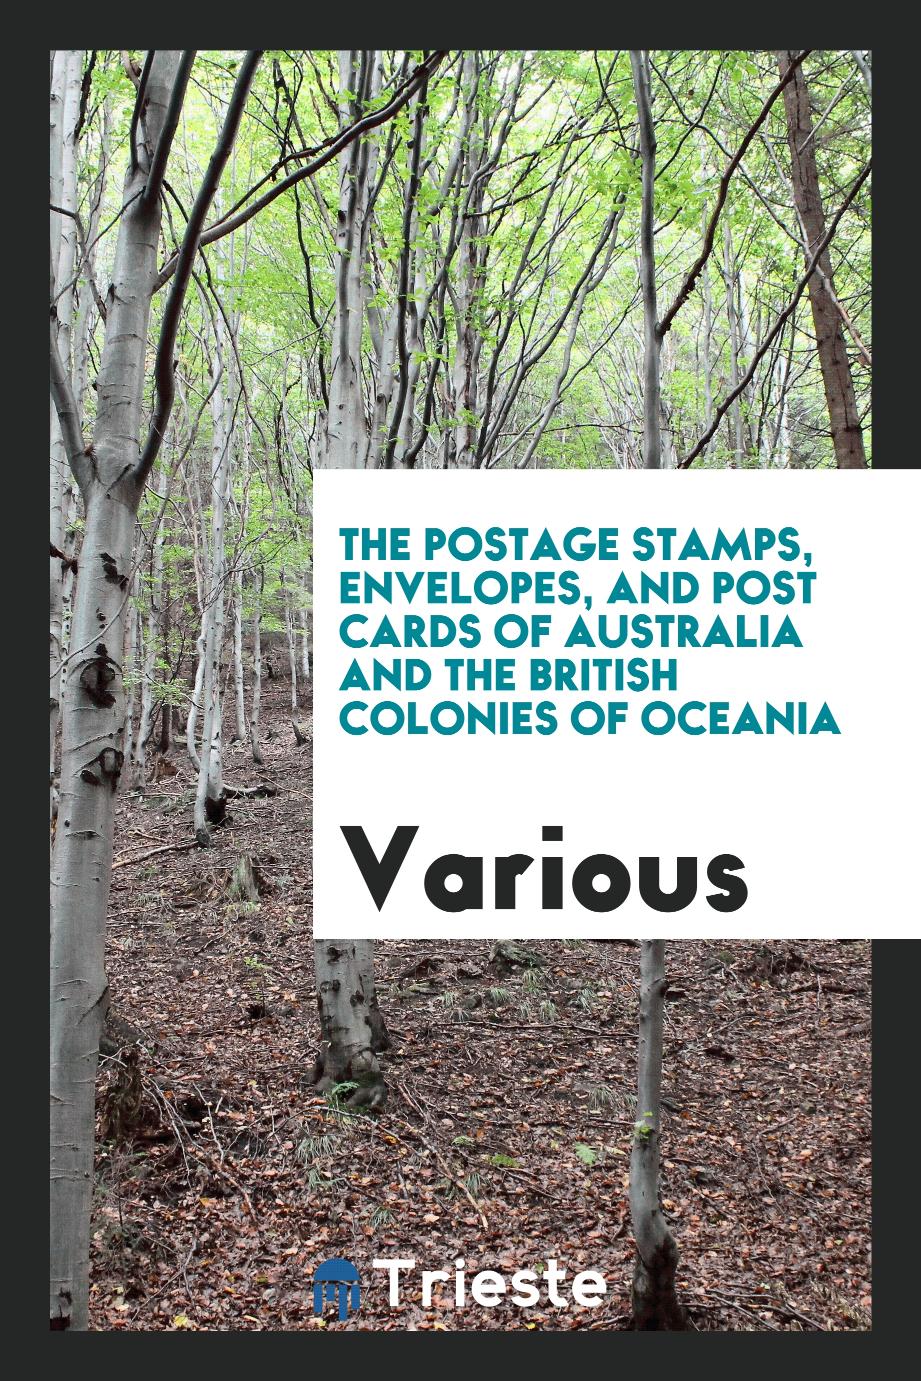 The postage stamps, envelopes, and post cards of Australia and the British Colonies of Oceania